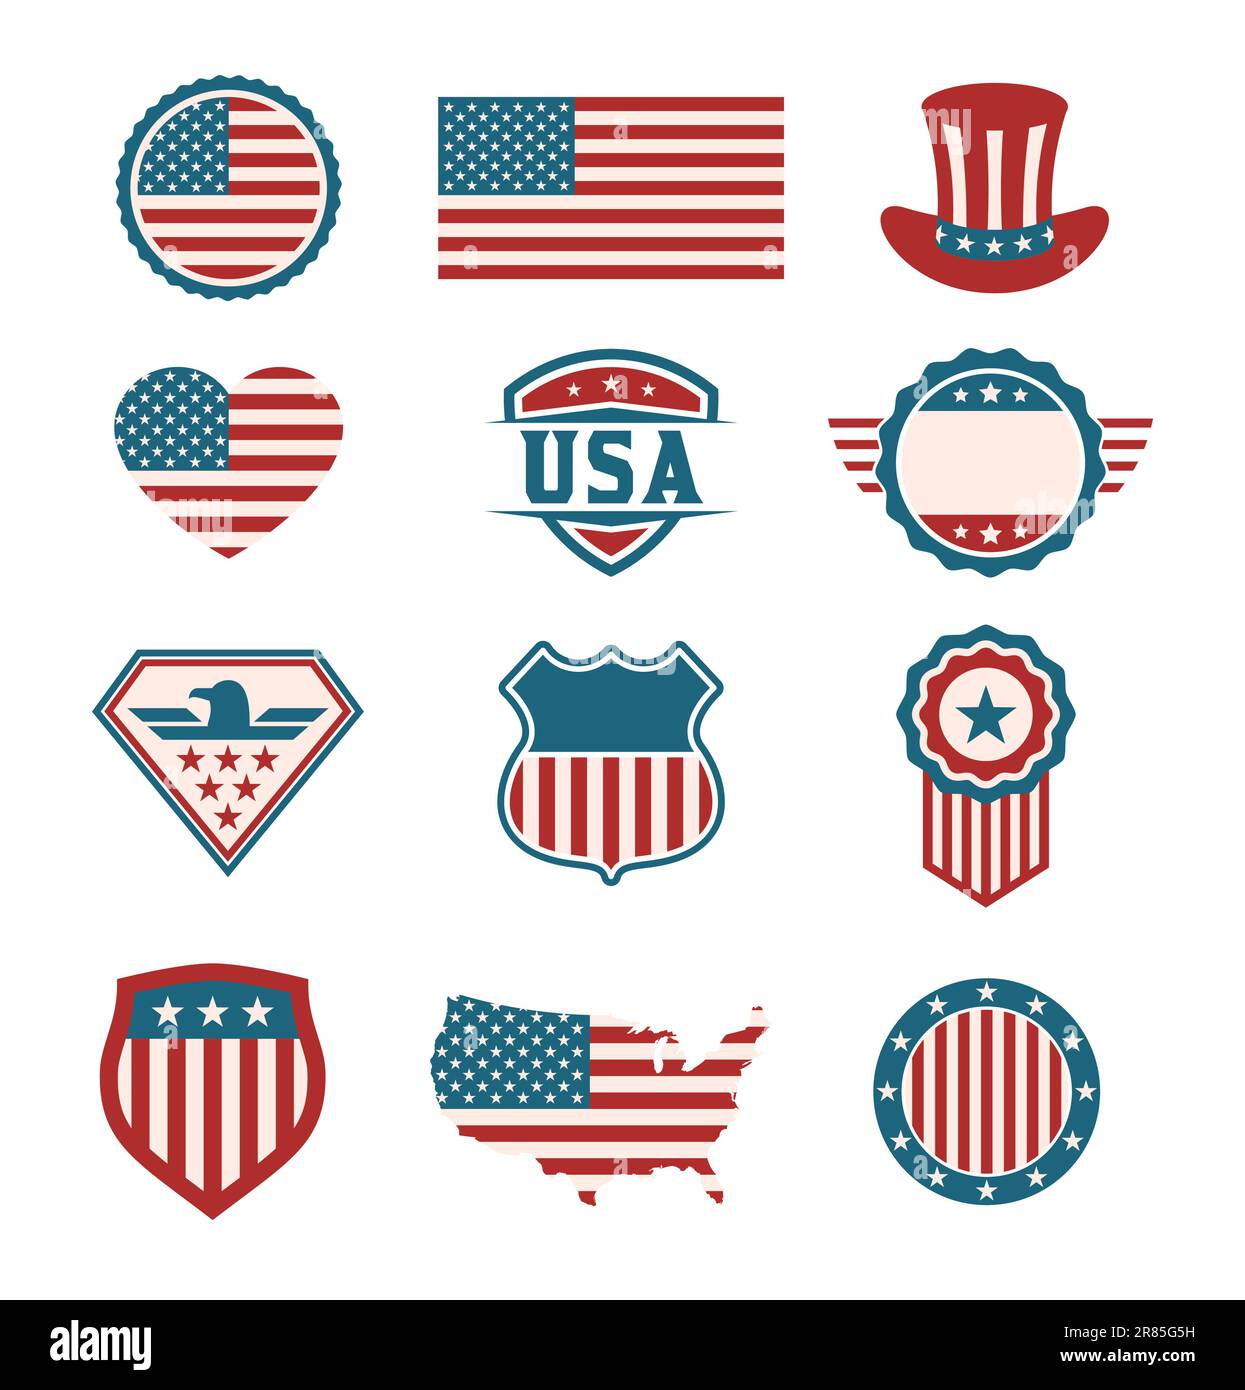 USA symbol set. American emblems collection. US labels, badges and shields. American themed graphics suitable for elections, Independence Day. Vector Stock Vector